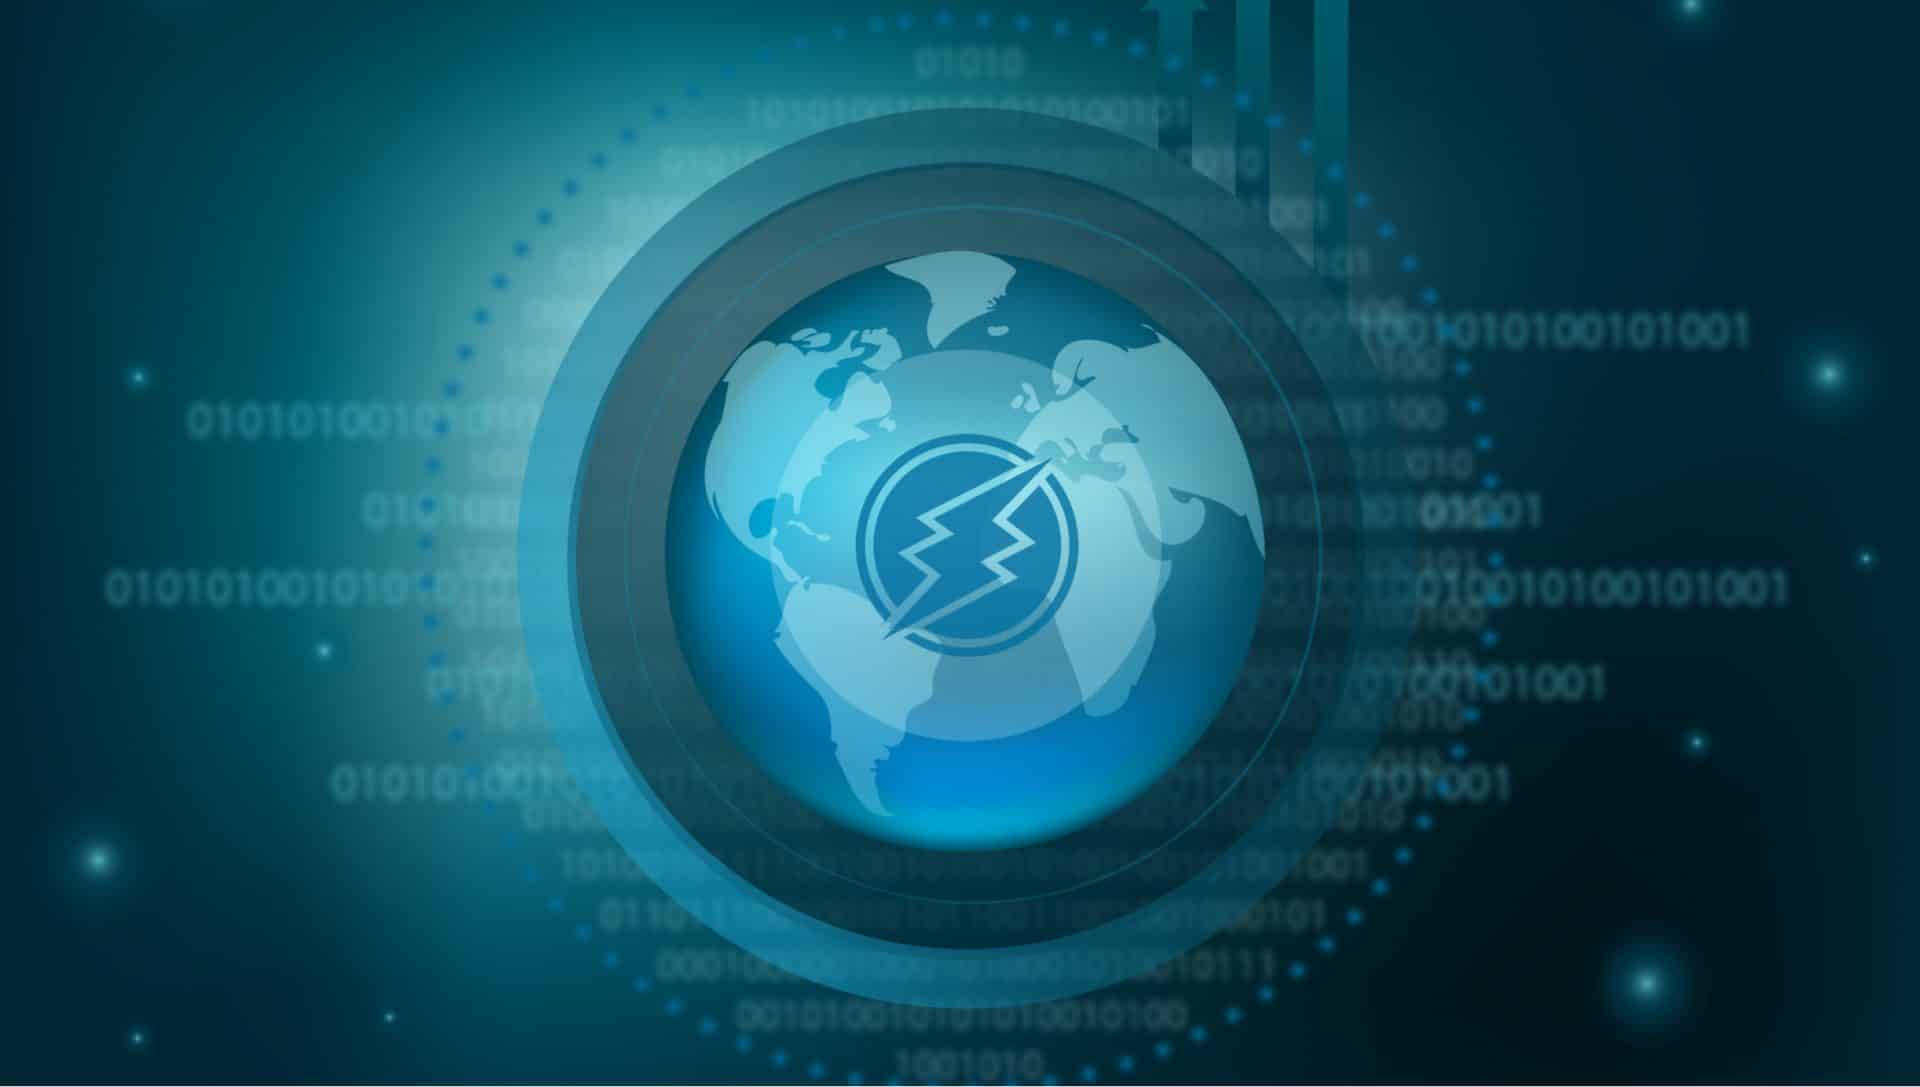 Electroneum Becomes One of the Eco-friendly Blockchain ...